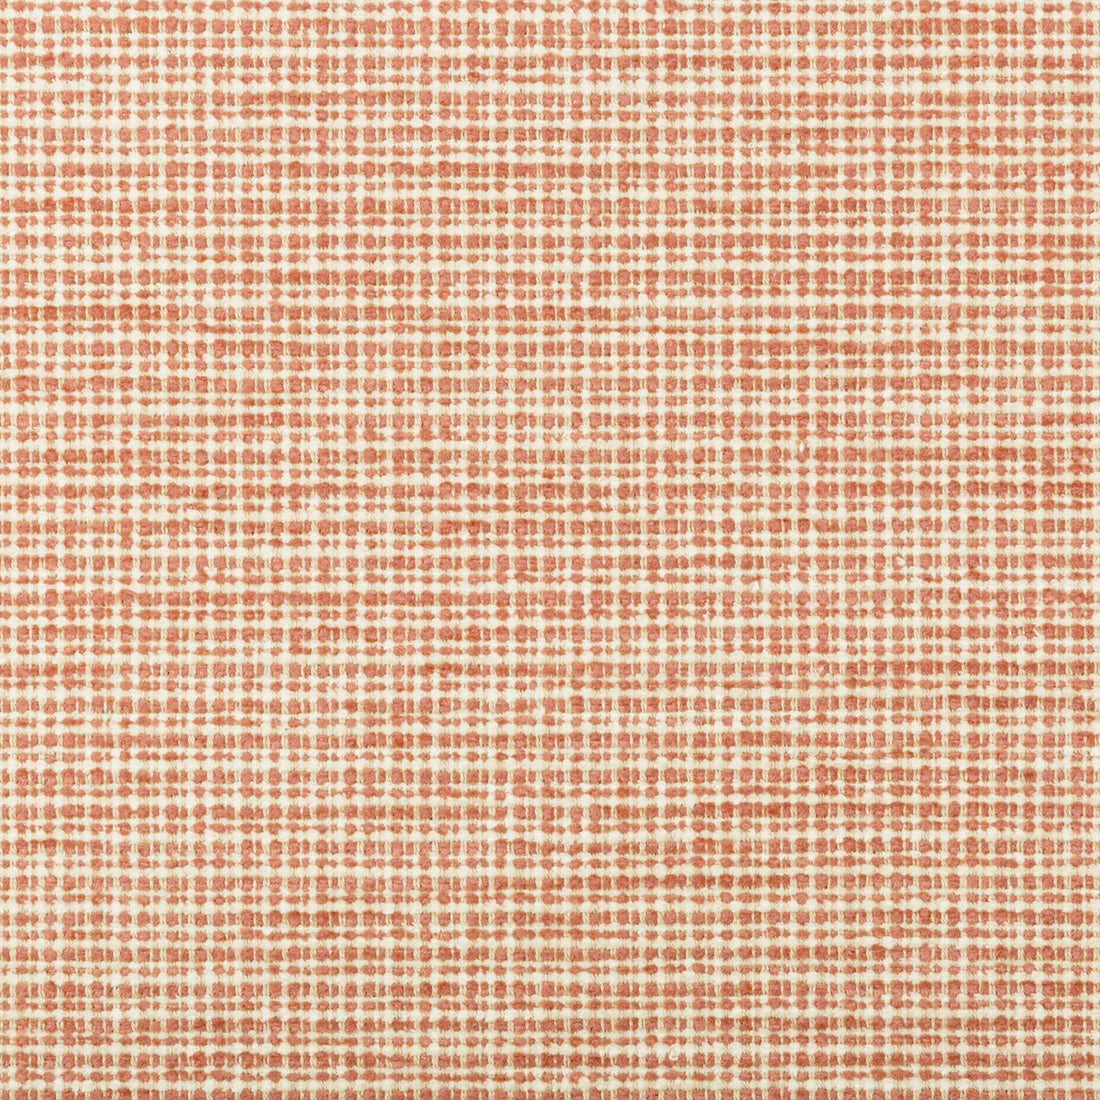 Freney Texture fabric in melon color - pattern 8019149.44.0 - by Brunschwig &amp; Fils in the Chambery Textures II collection